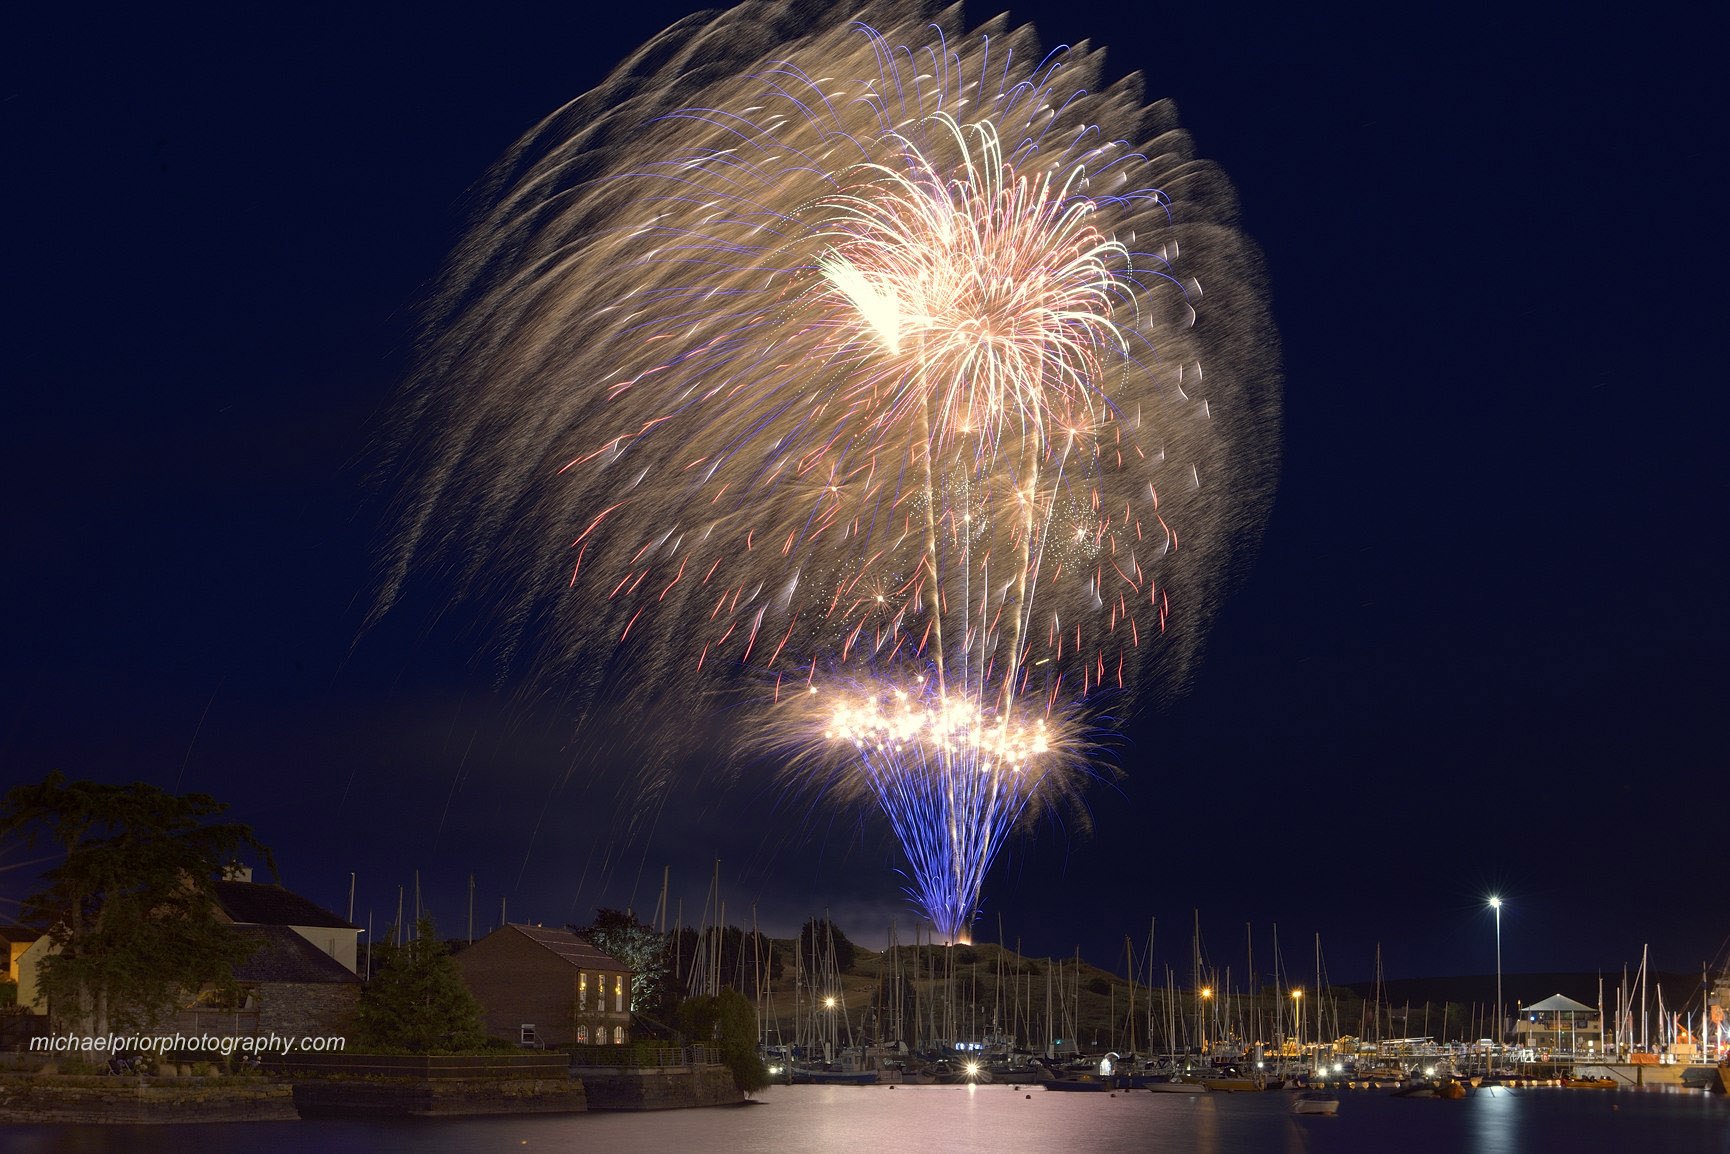 Fireworks Over Kinsale - Michael Prior Photography 